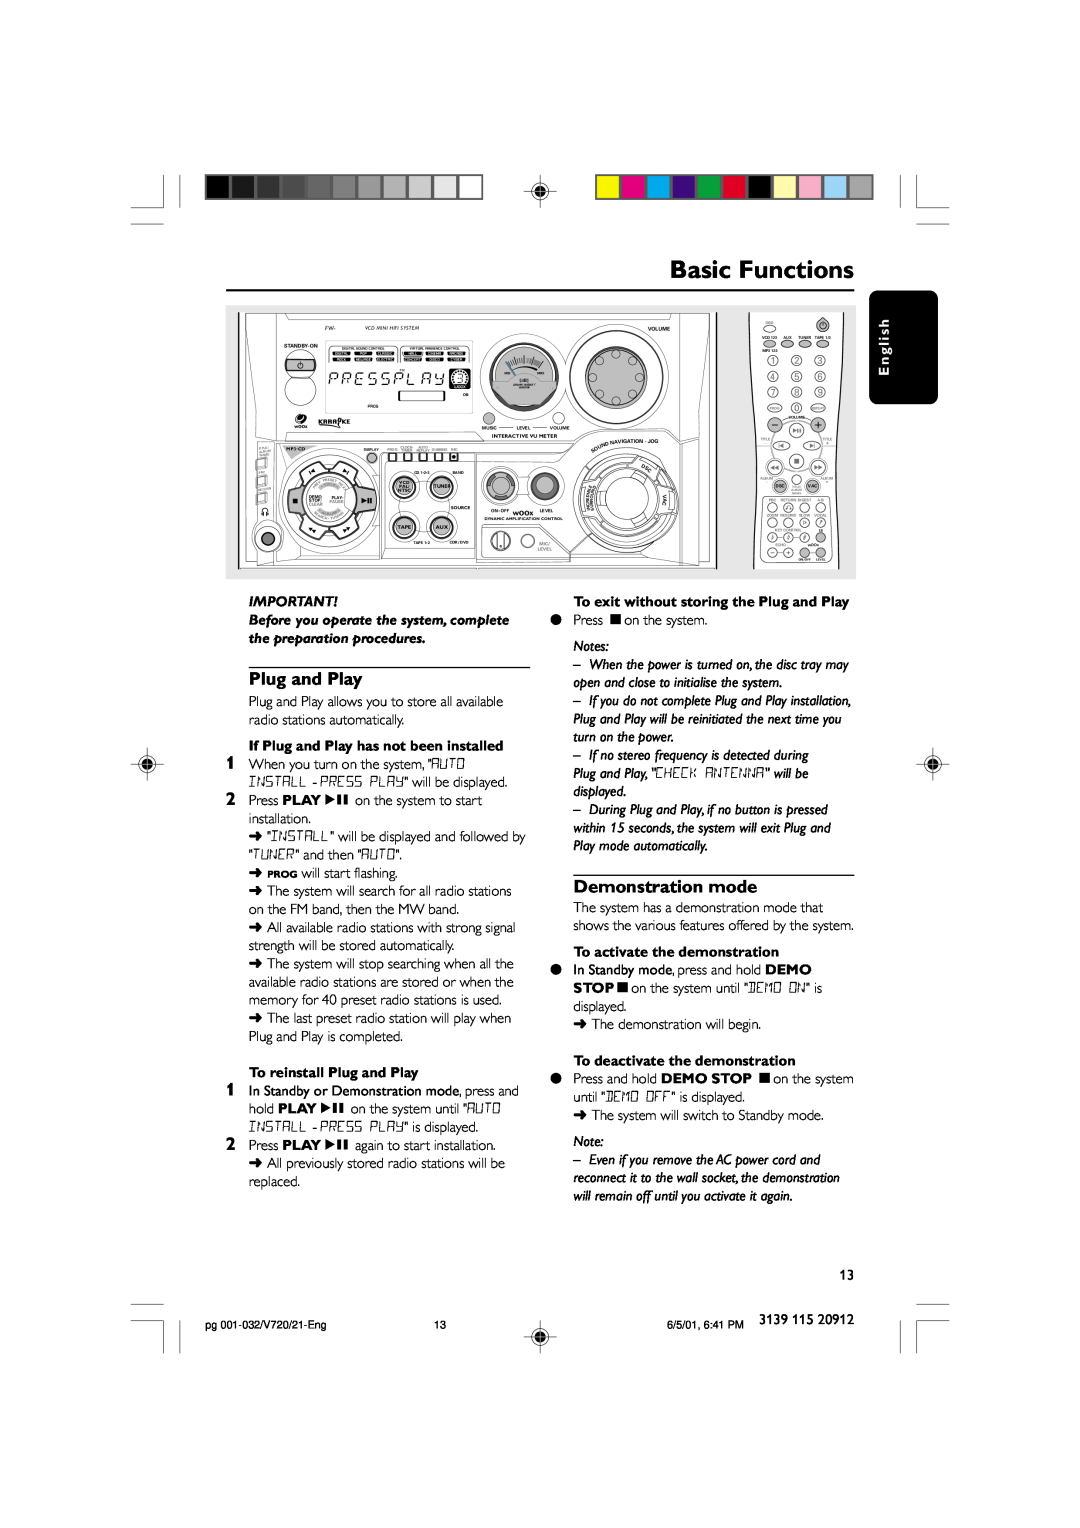 Philips FW-V720 manual Basic Functions, If Plug and Play has not been installed, To reinstall Plug and Play 